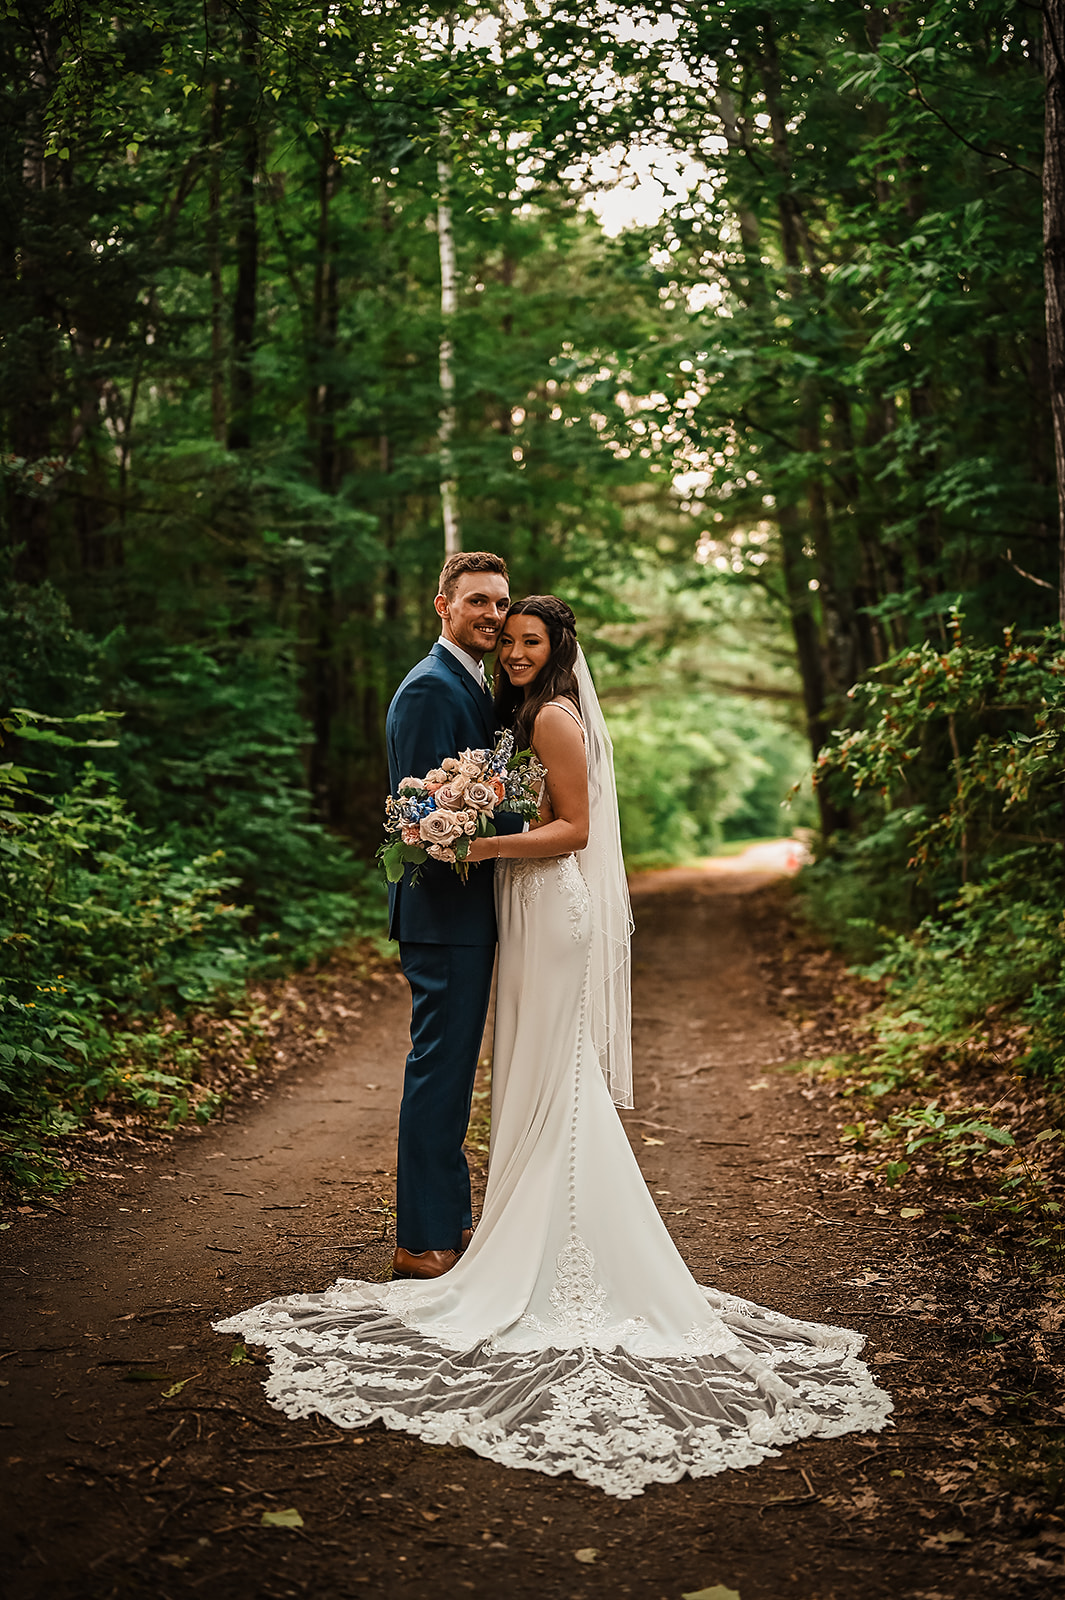 Chandler and Tyler were married at The Water's Edge Estate in Skowhegan, Maine. The setting for the wedding was absolute